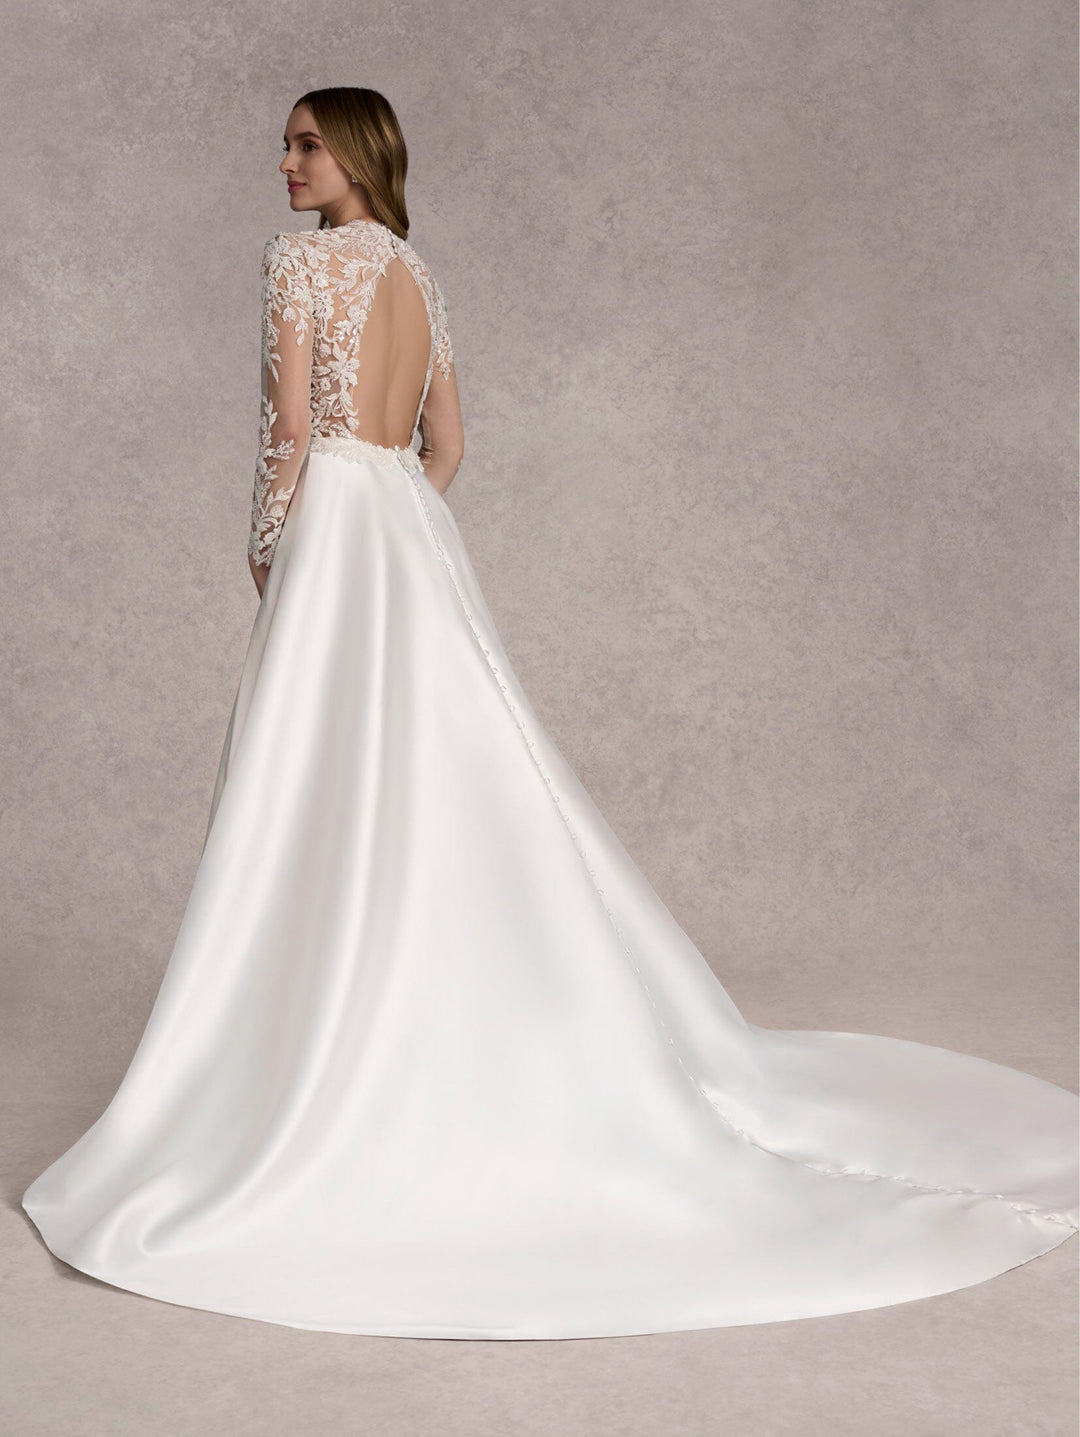 Applique Mikado Slit Bridal Gown by Adrianna Papell 31266